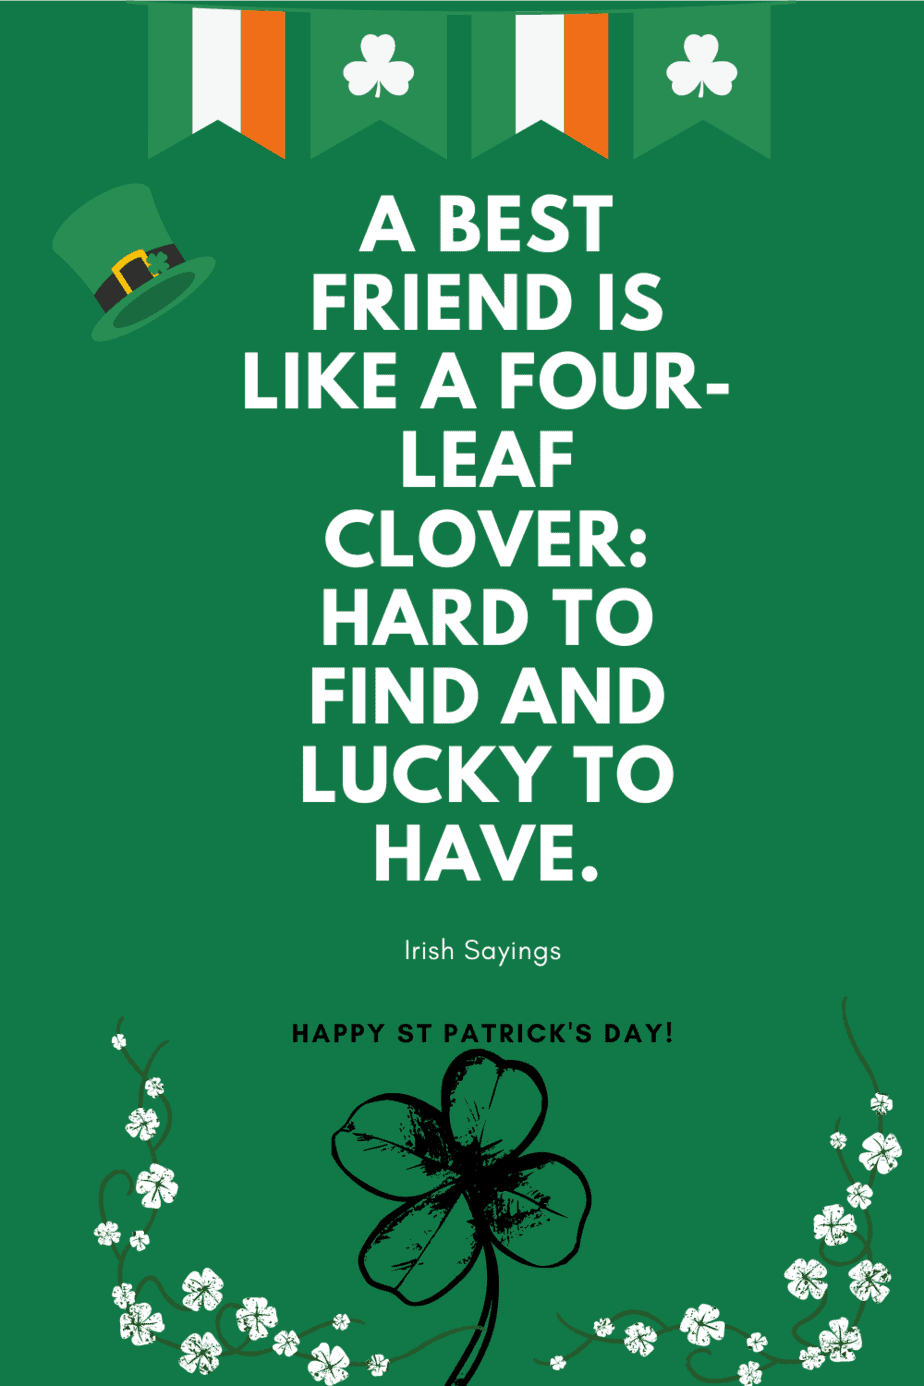 A best friend is like a four-leaf clover hard to find and lucky to have Irish sayings for St Patrick's day